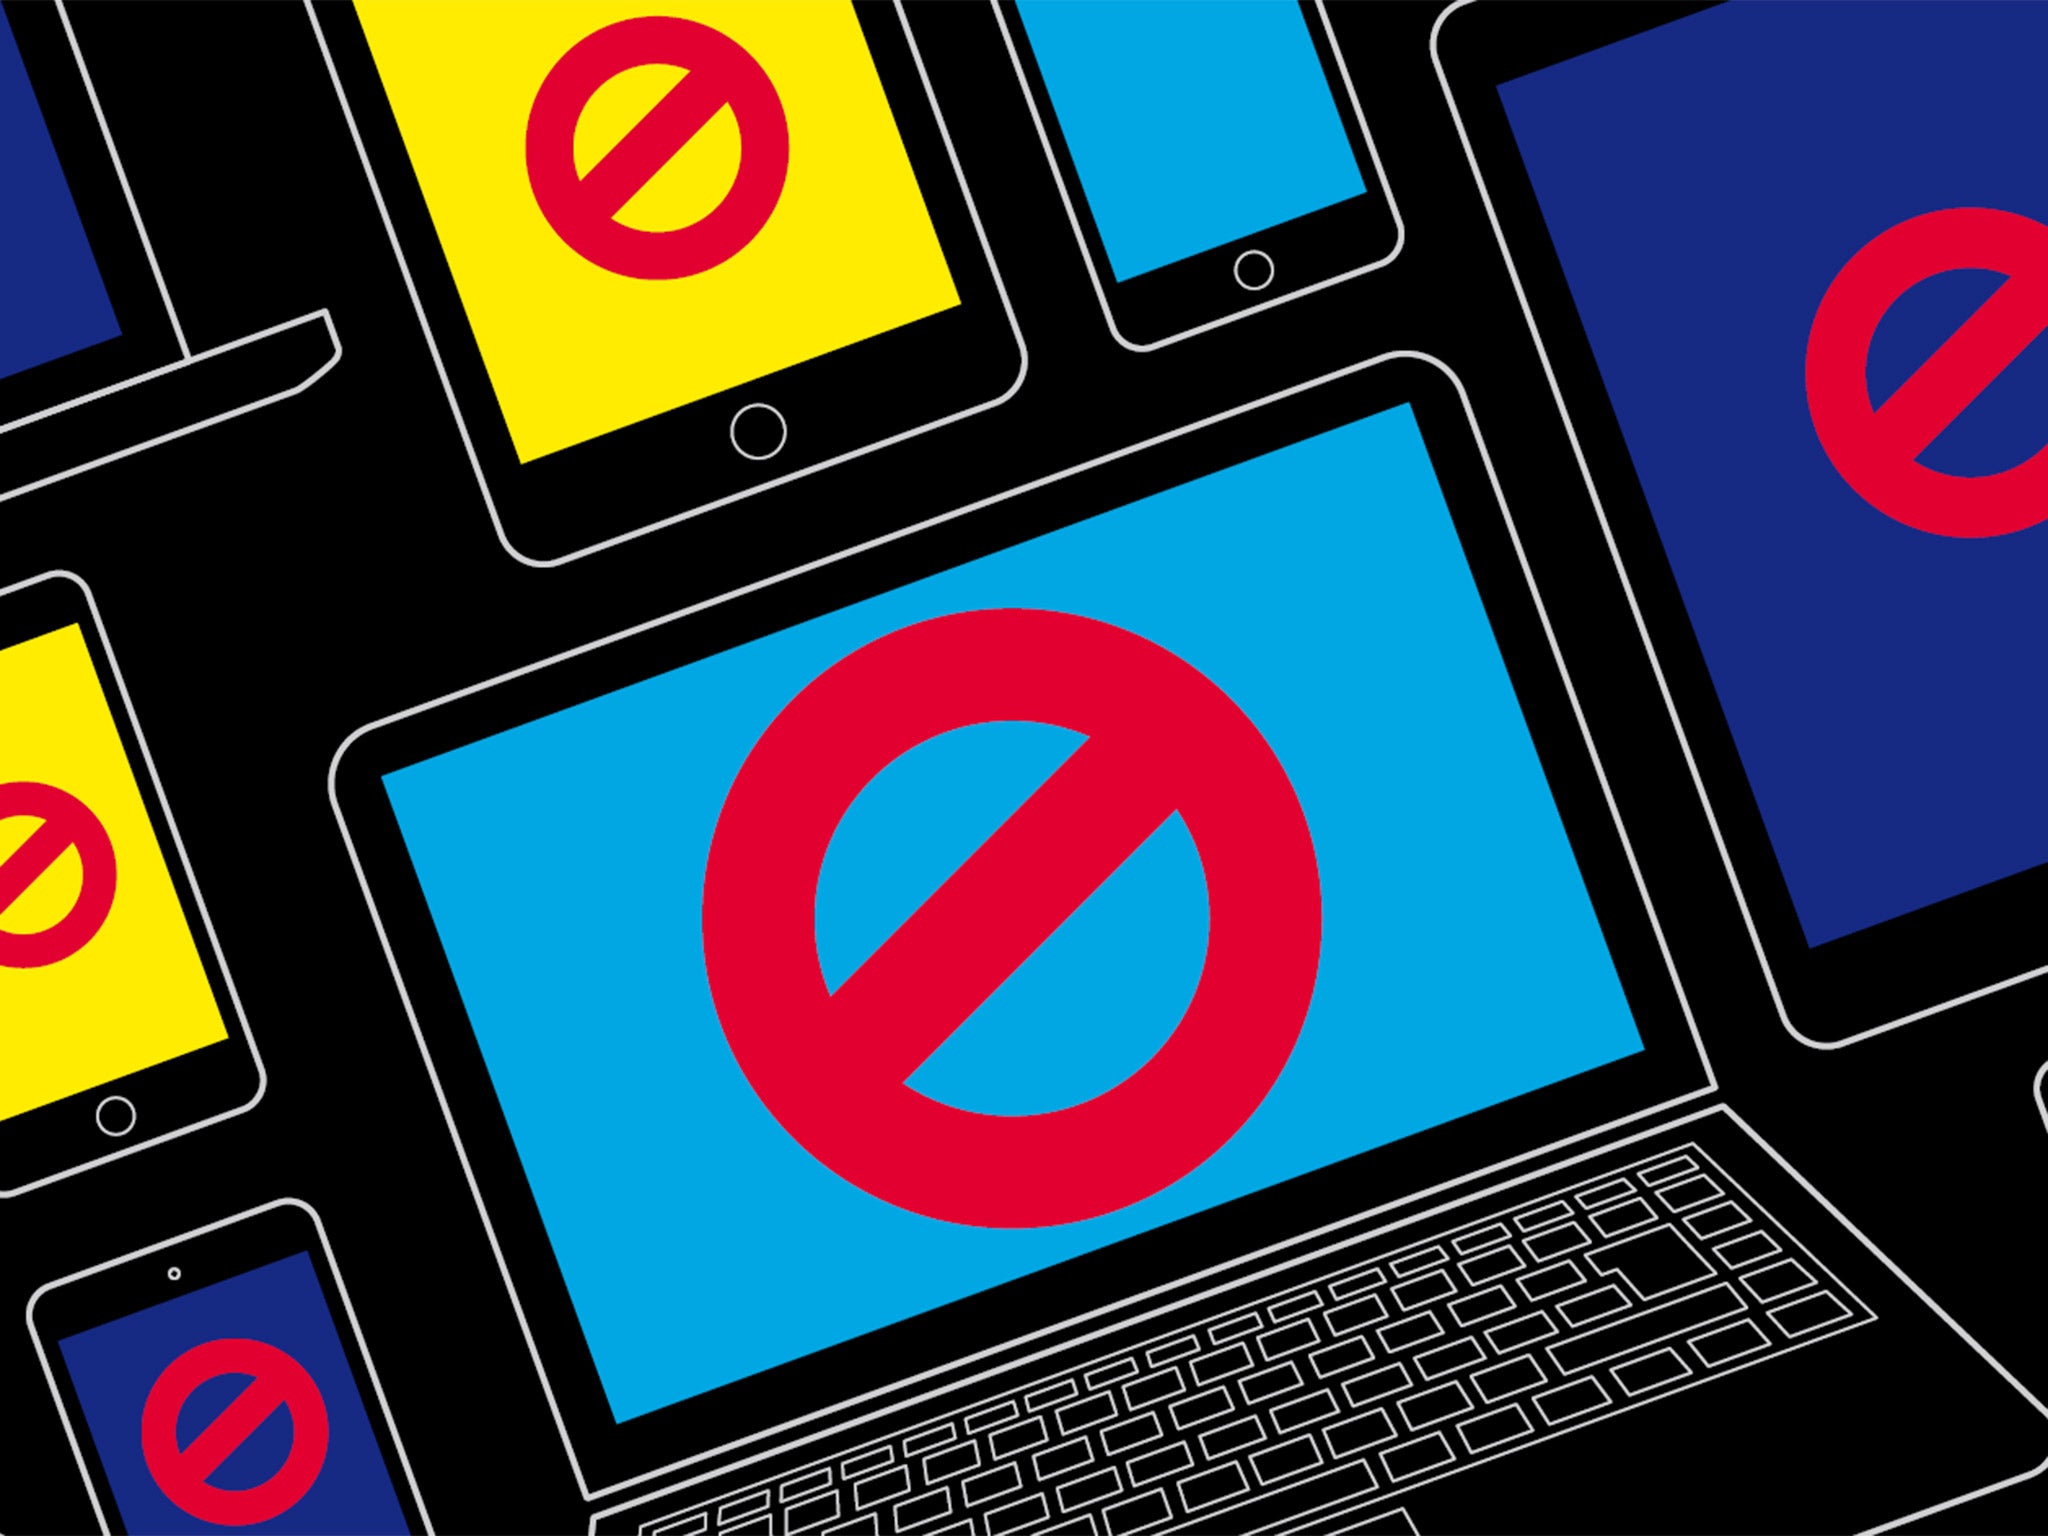 Pop-off: first there were ads, then there were ad-blockers – so what next?